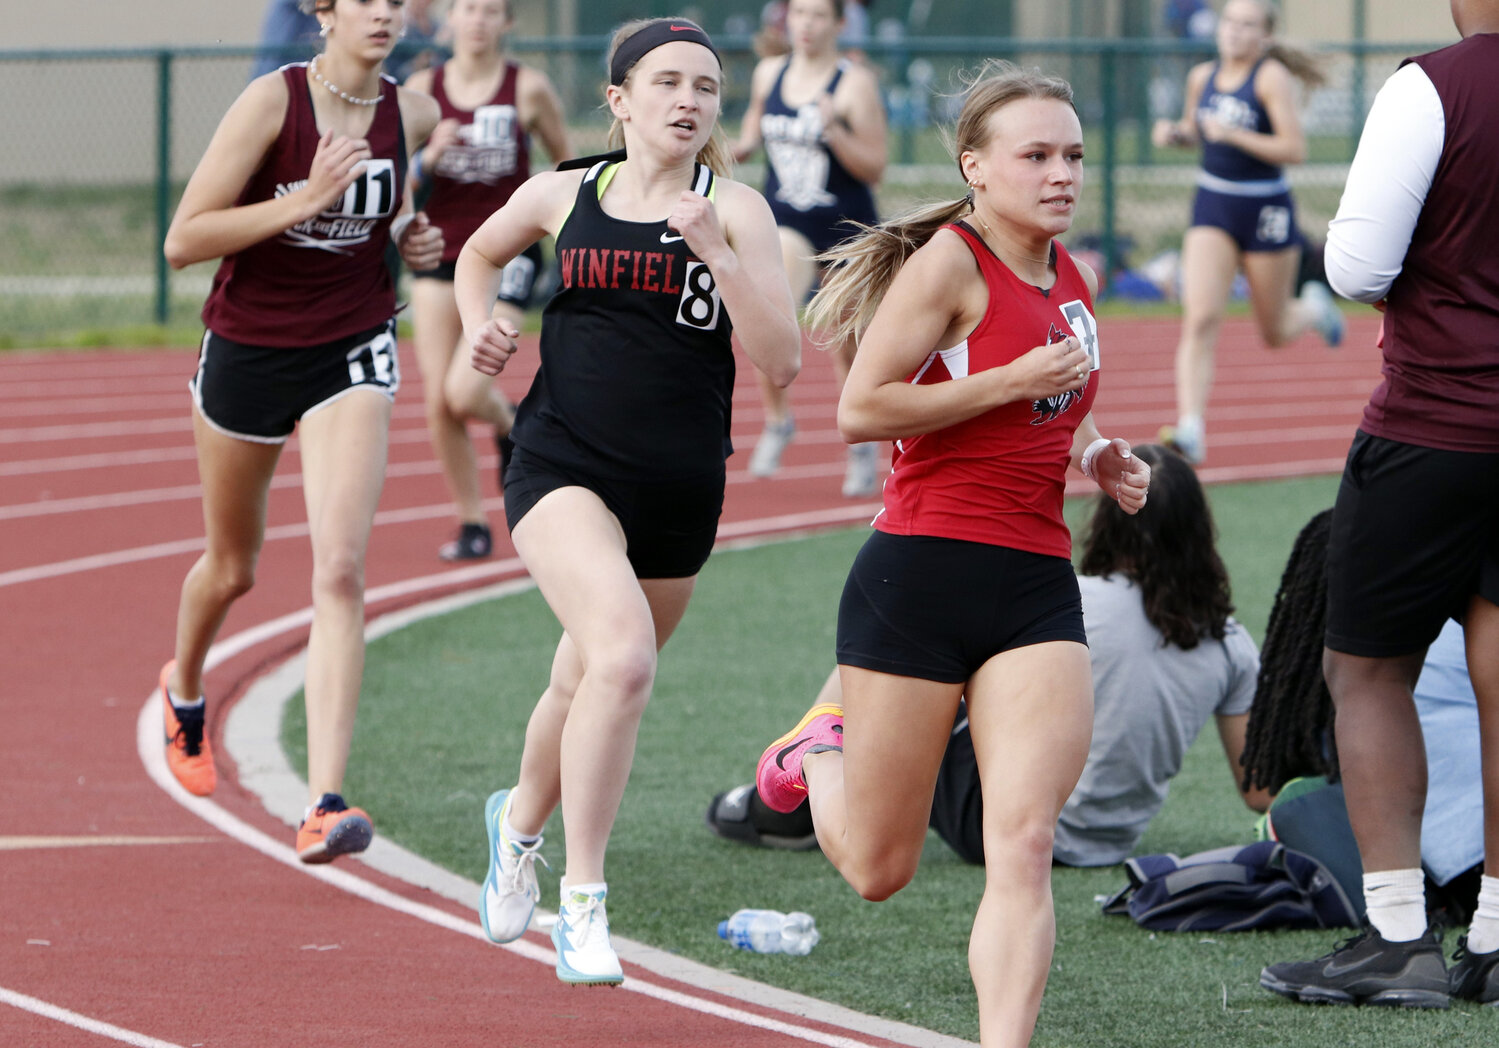 Madelyn Marschel (right) leads a pack of runners during the girls 800-meter run.